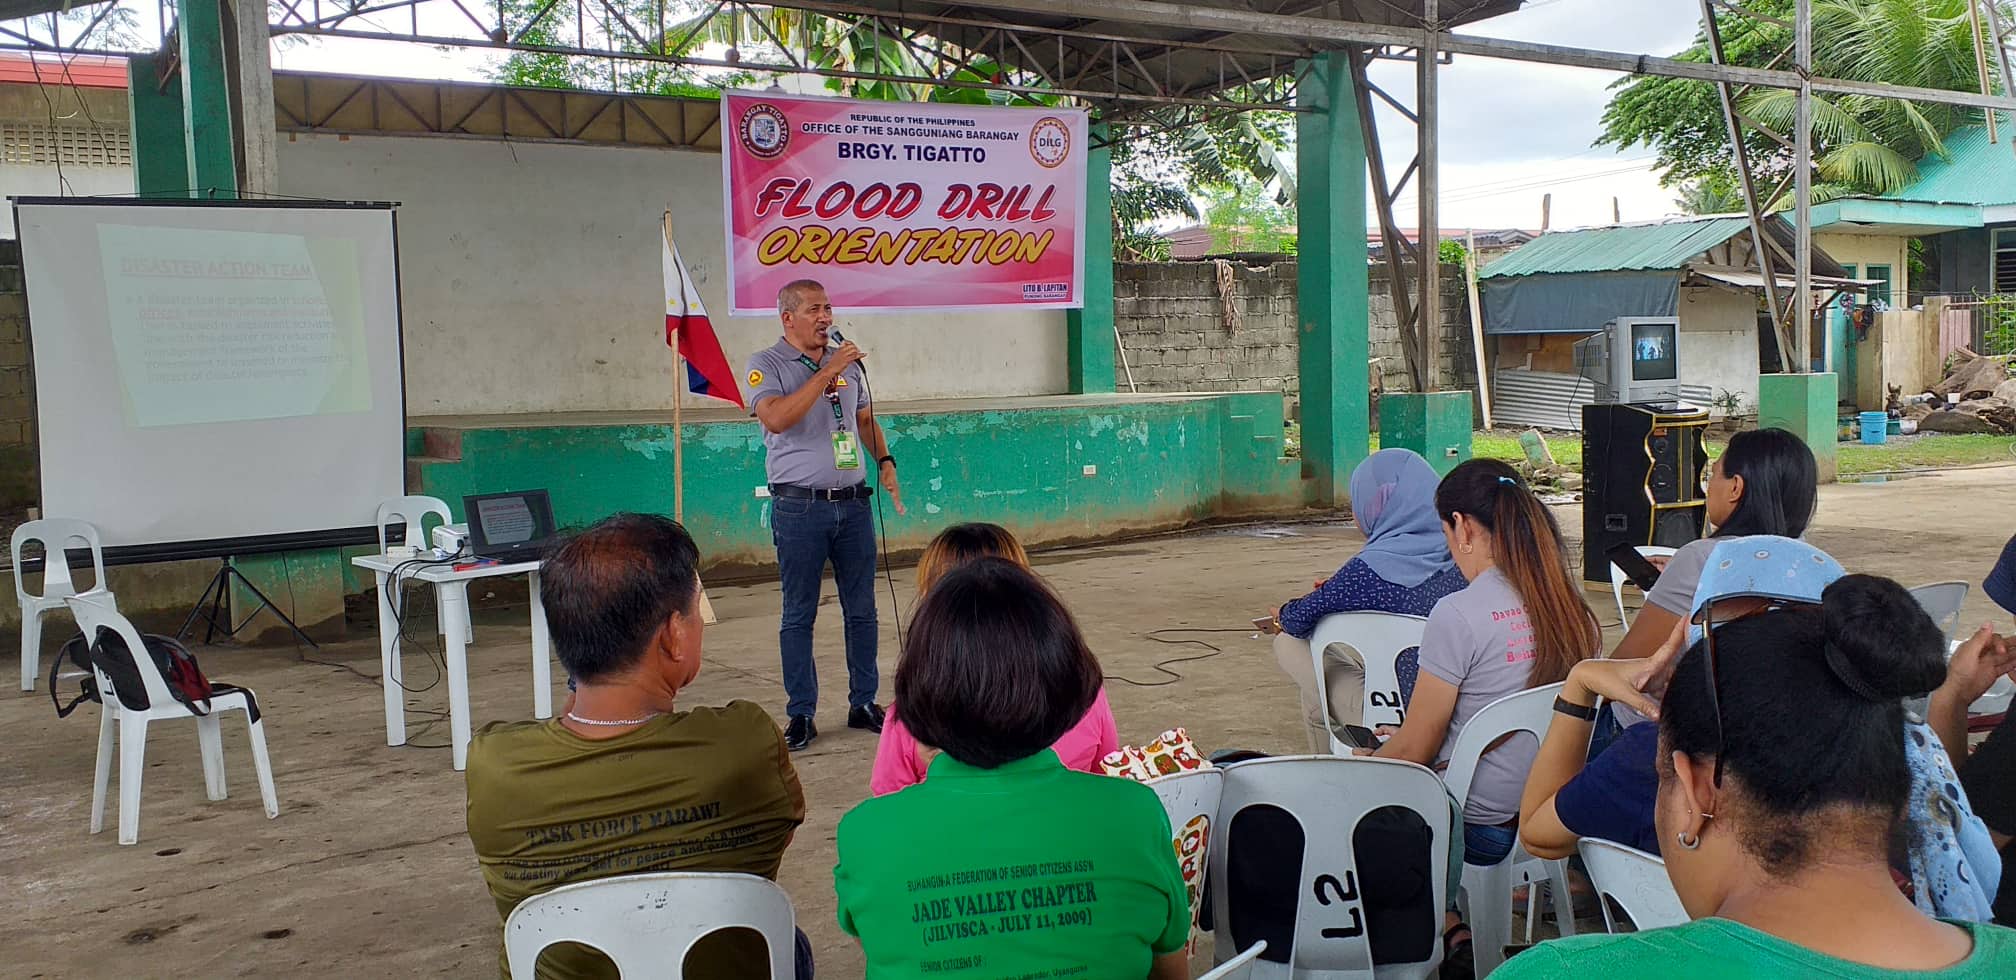 Flood Drill and Orientation at Brgy Tigatto, October 30, 2019. With Mr. Rodrigo Bustillo in front. 